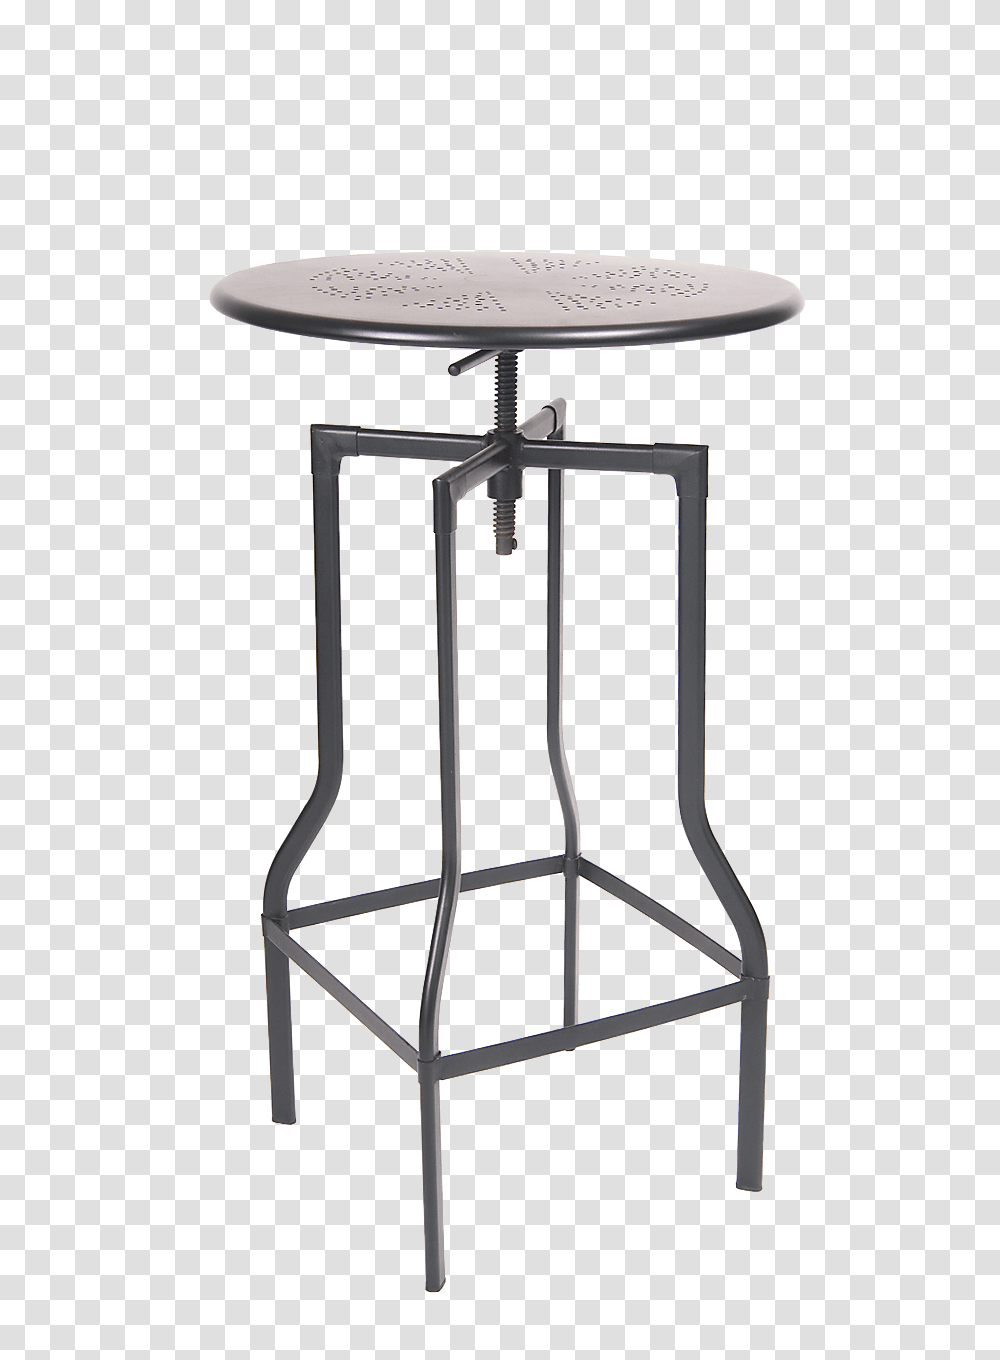 Round Indoor Steel Table In Black Finish, Machine, Scale, Lamp Transparent Png